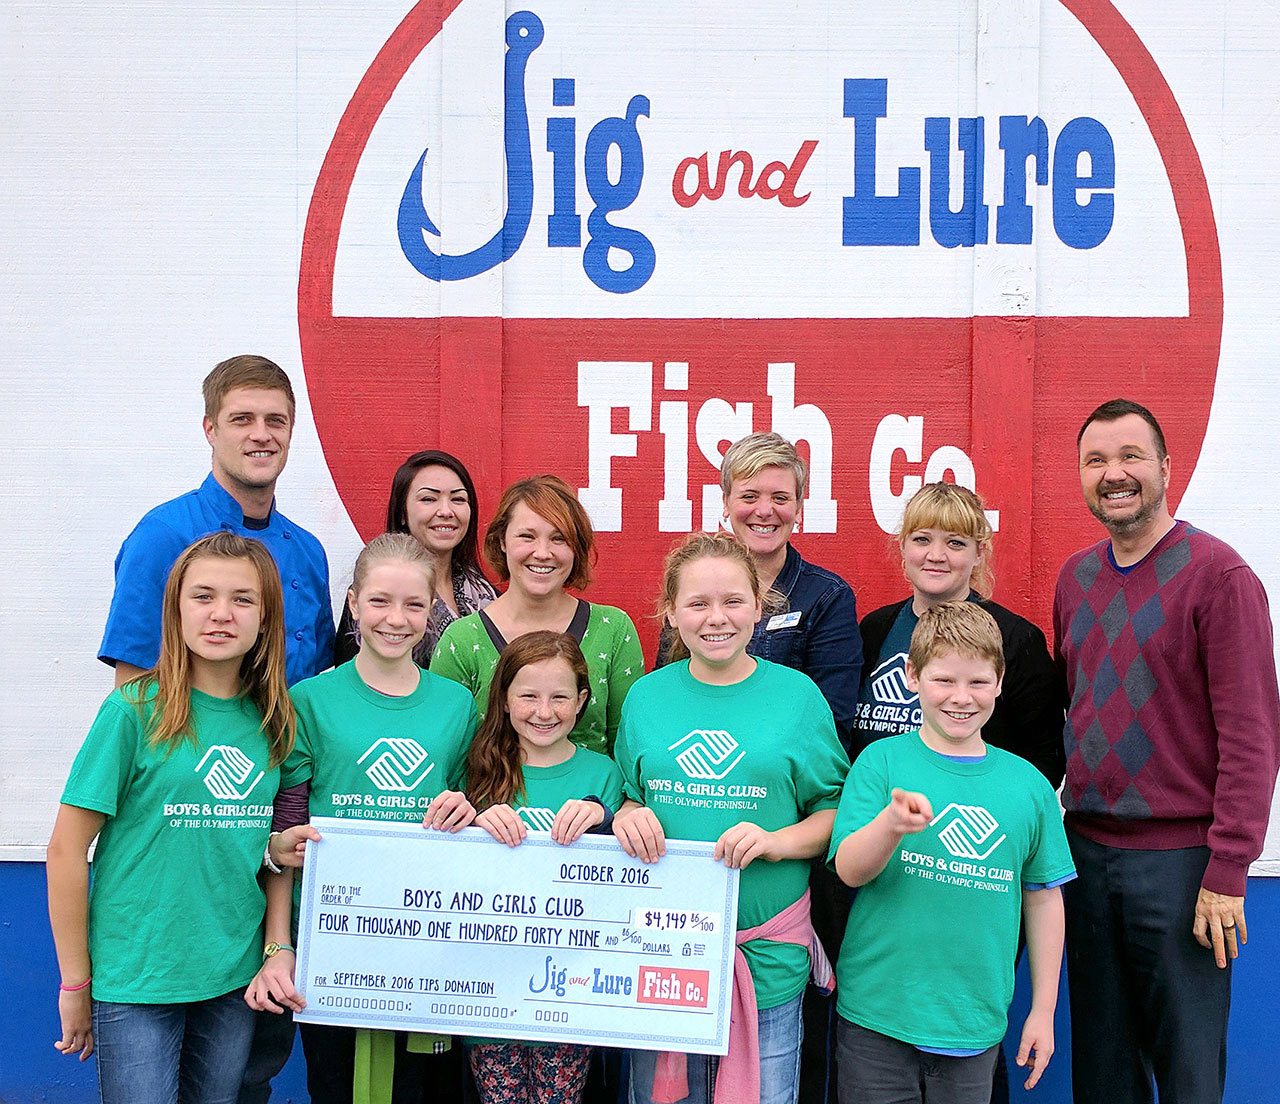 Port Angeles Boys and Girls Club members accept a check for $4,149.86 from the Jig and Lure Fish Company staff, accompanied by United Way and Boys & Girls Club staff. From back left are executive chef Brian Lippert, server Shawna Cochrum, guest services manager Christina Fenner, United Way resource development manager Christy Smith, Boys & Girls Club Port Angeles unit director Ashley Woolsey, and co-owner Stephen Fofanoff. Submitted photo